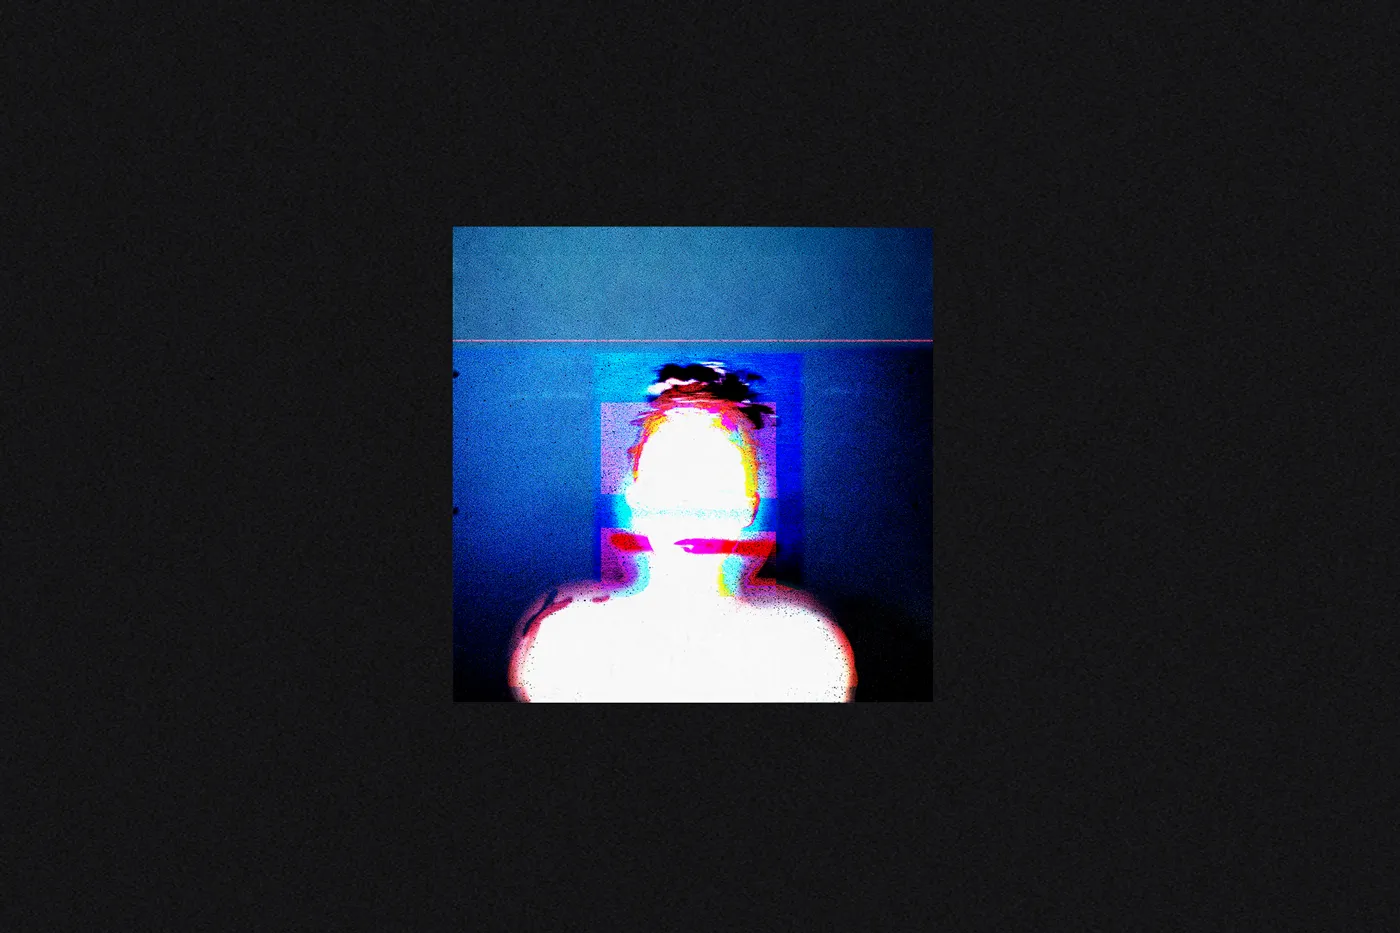 The silhouete of a woman, the background its blue and has a glitch effect. The silhouete is white and the face is a little blurred